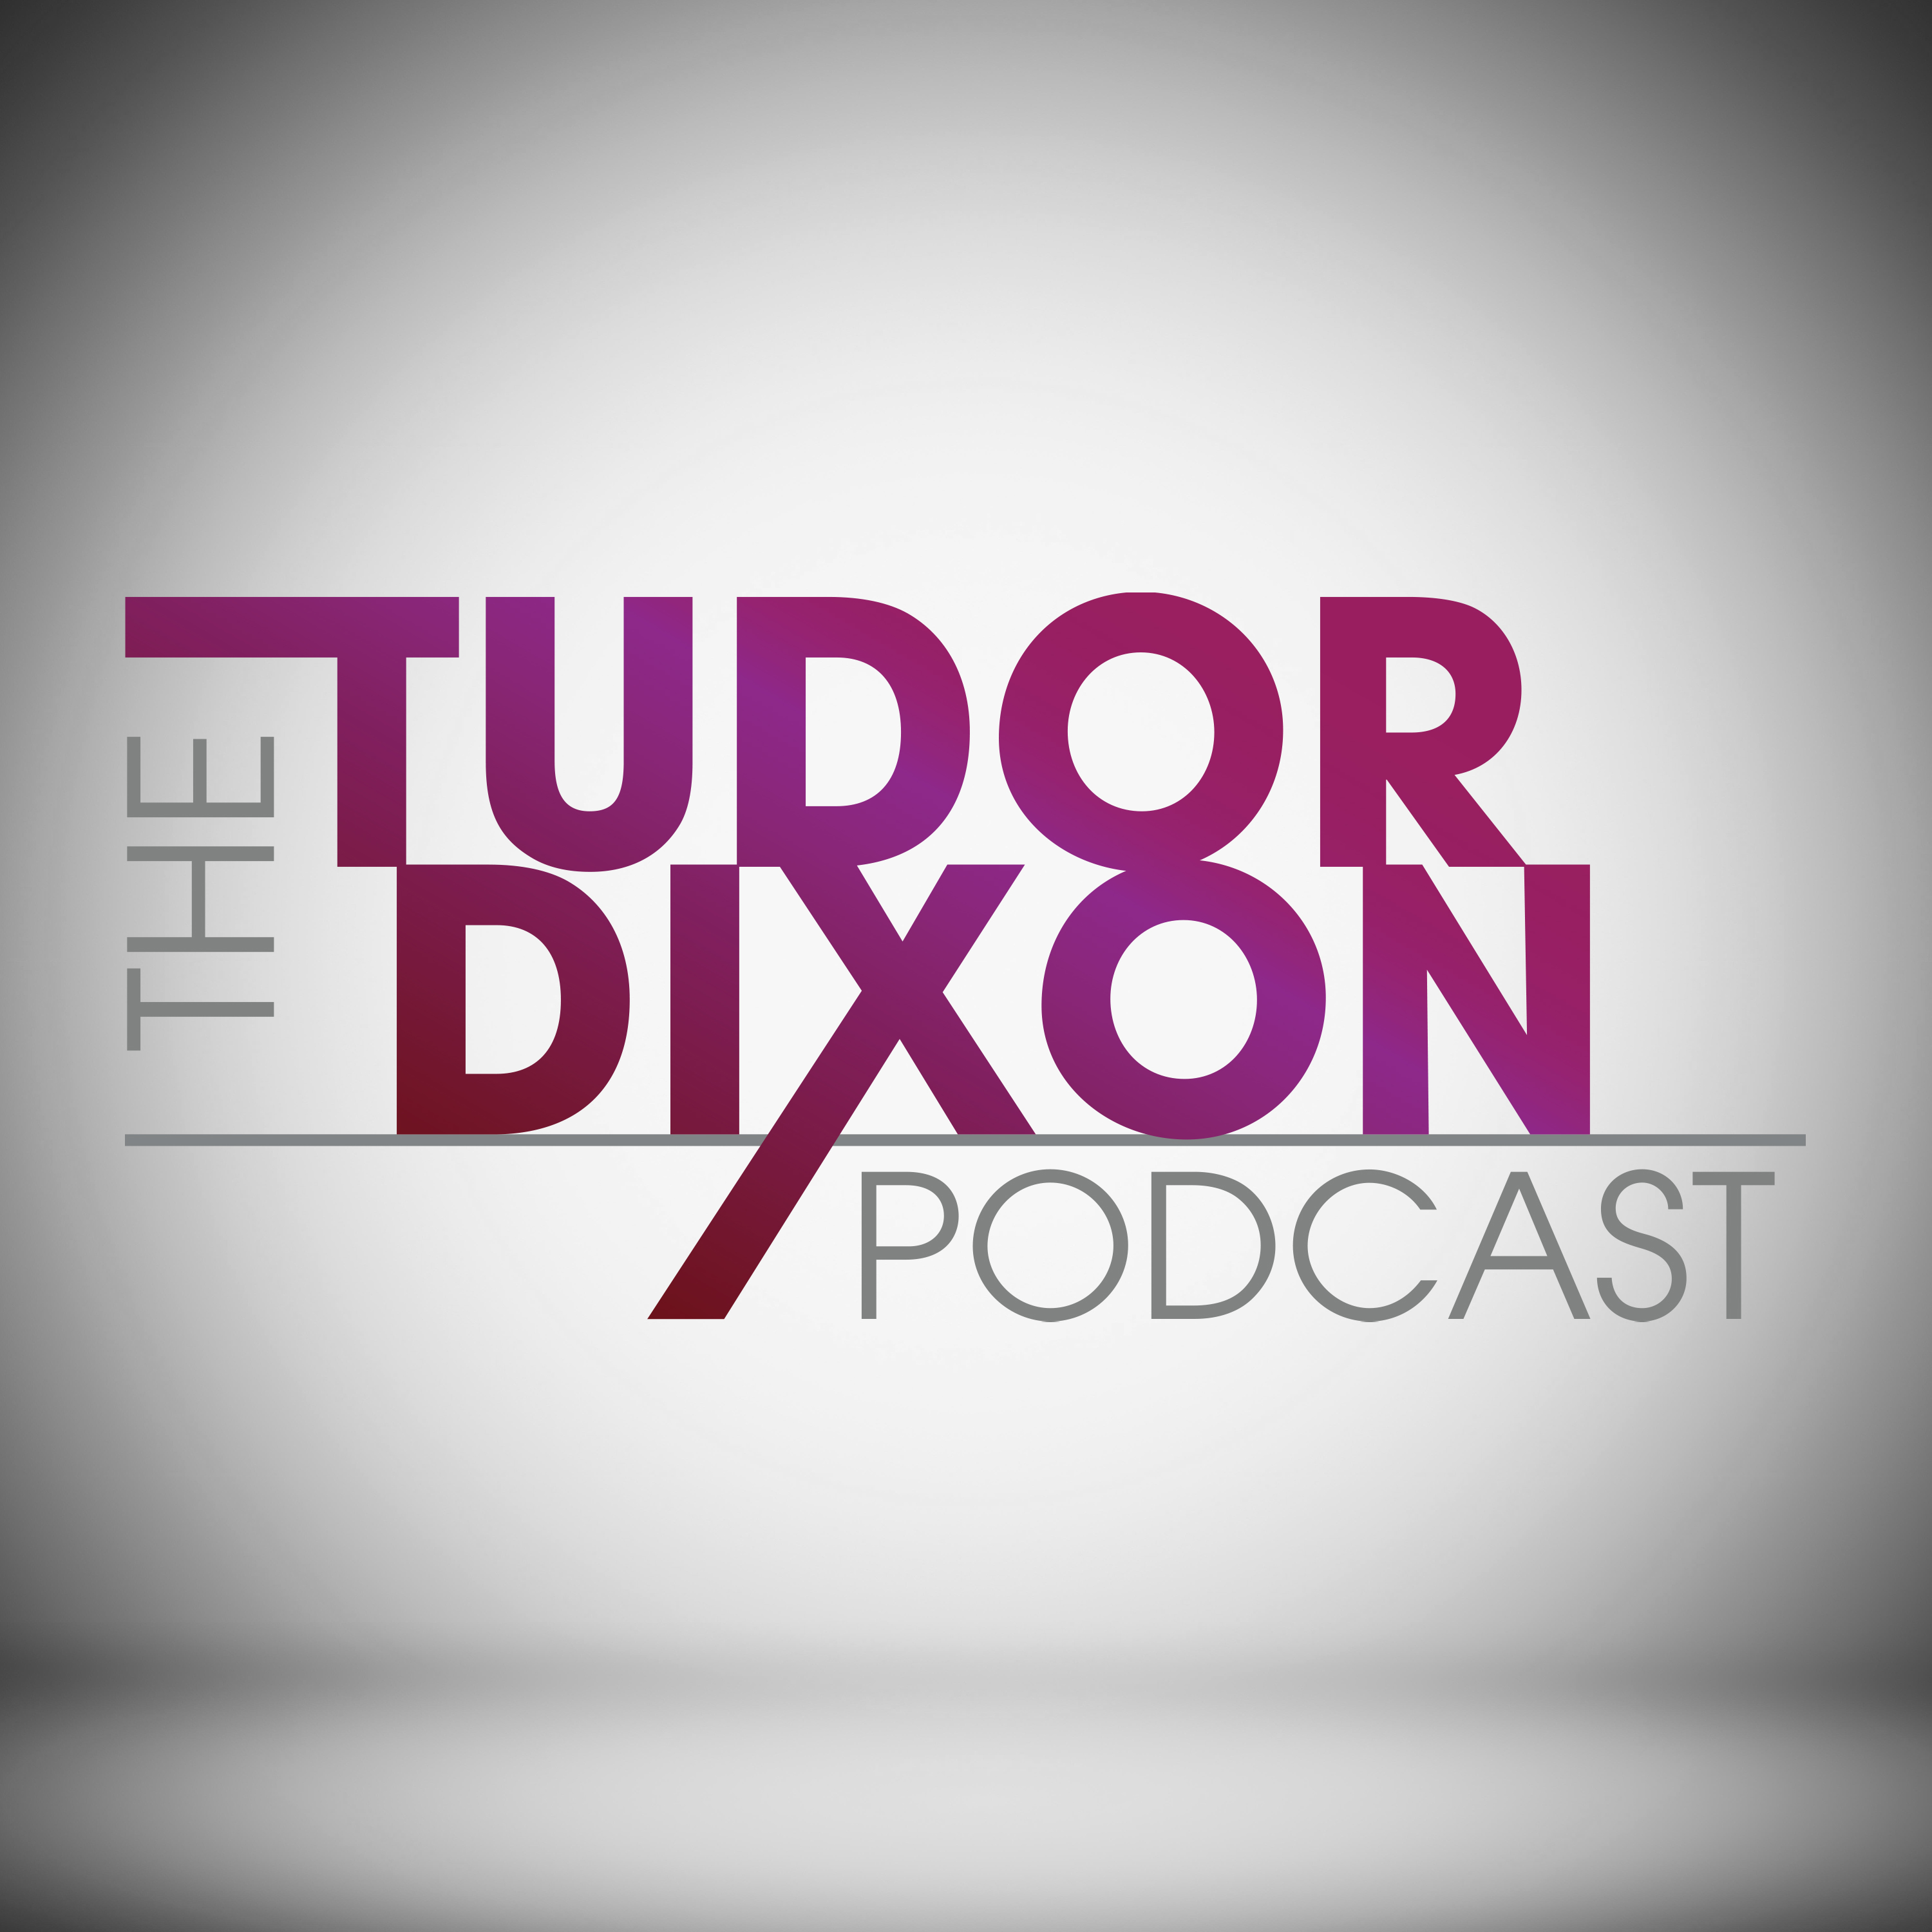 The Tudor Dixon Podcast: China’s Influence and Actions: Unmasking the Truth with Gordon Chang